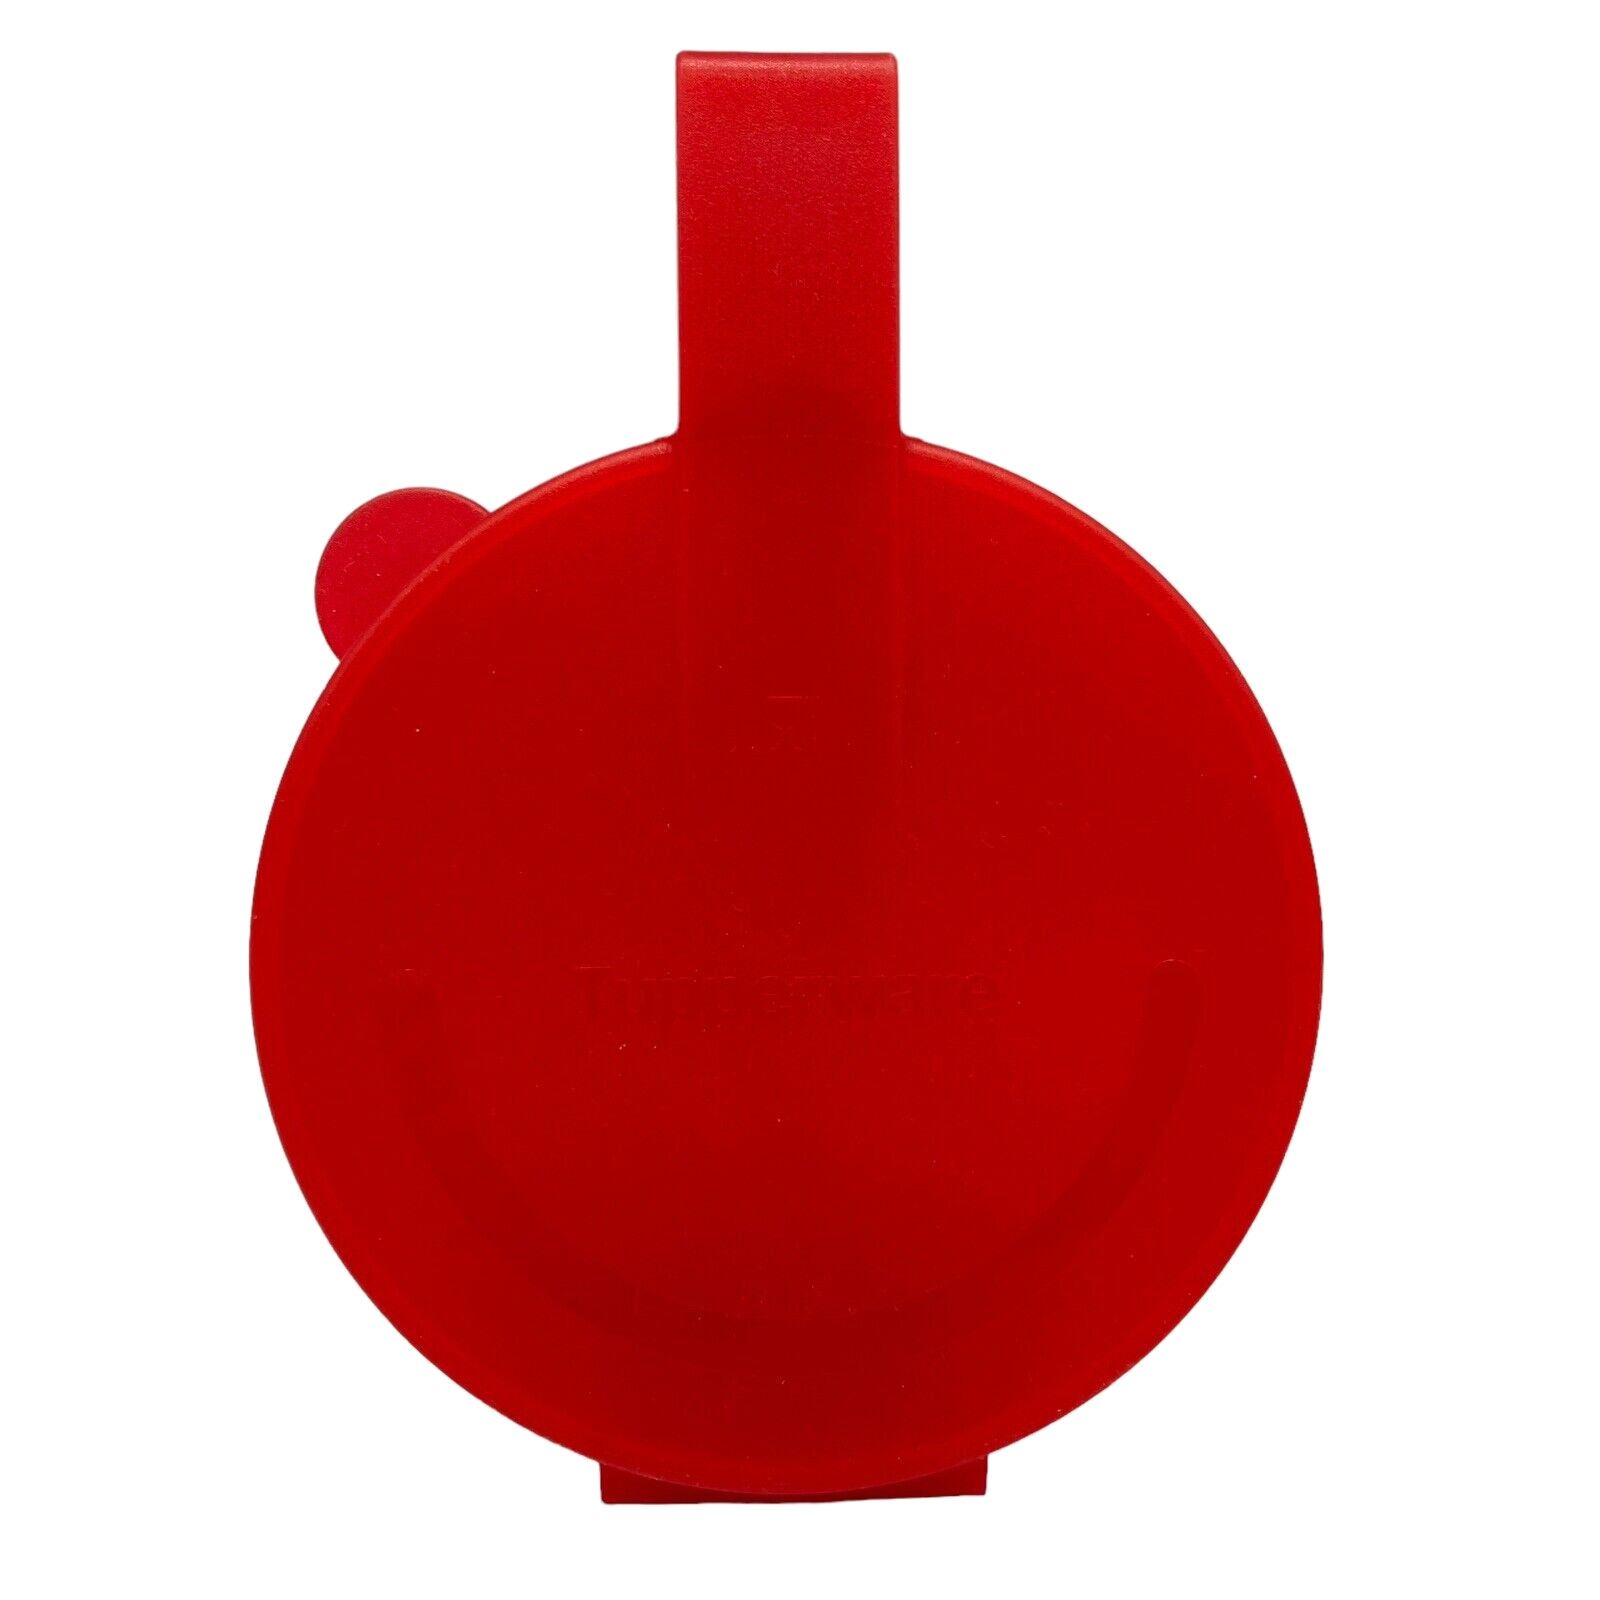 Tupperware Forget Me Not Onion/Tomato/Citrus Hanging Keeper 5105 Red